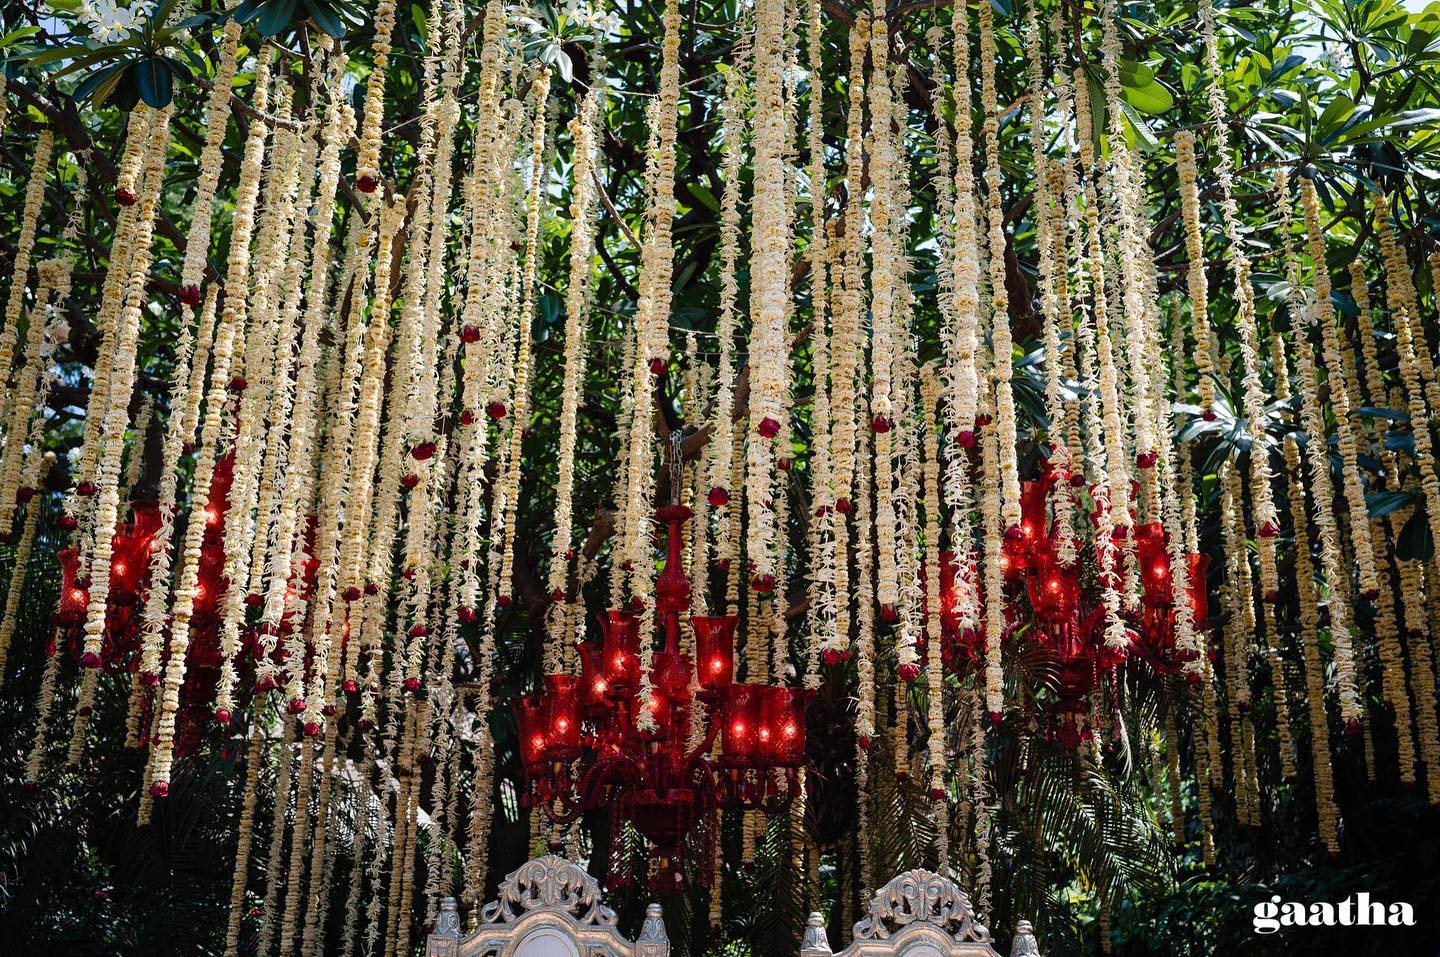 20+ Trending suspended floral decor ideas for your wedding